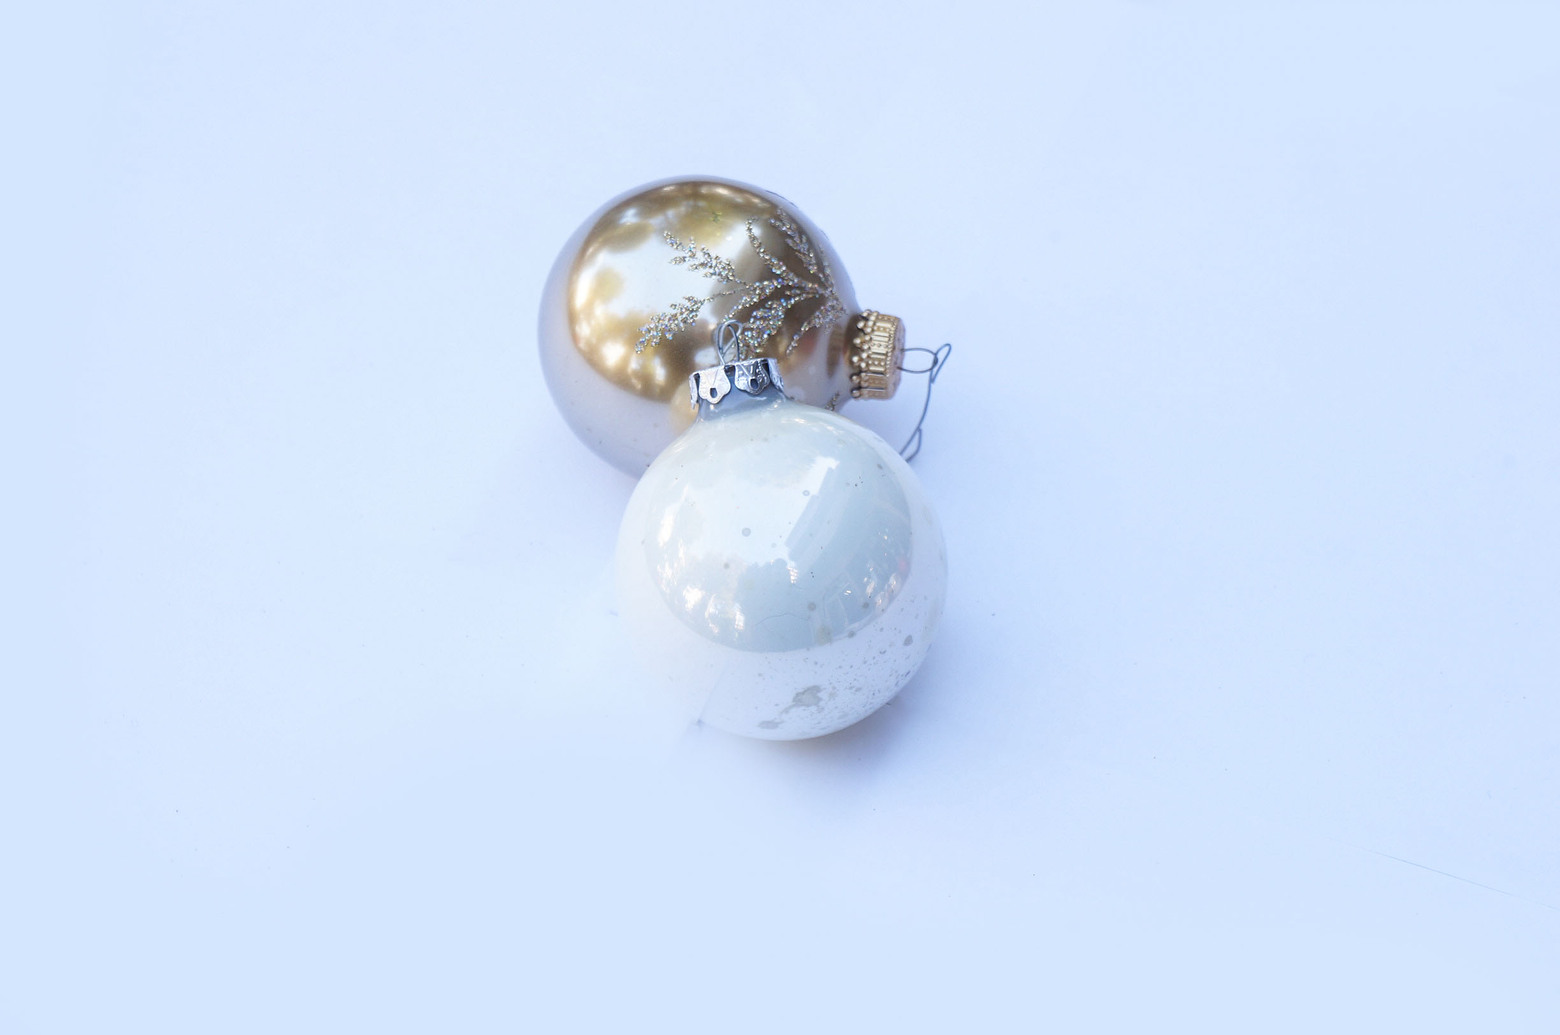 Vintage Blown Glass Christmas Ball Ornament/ヴィンテージ クリスマス オーナメント 吹きガラス ボール レトロ 7個セット 11